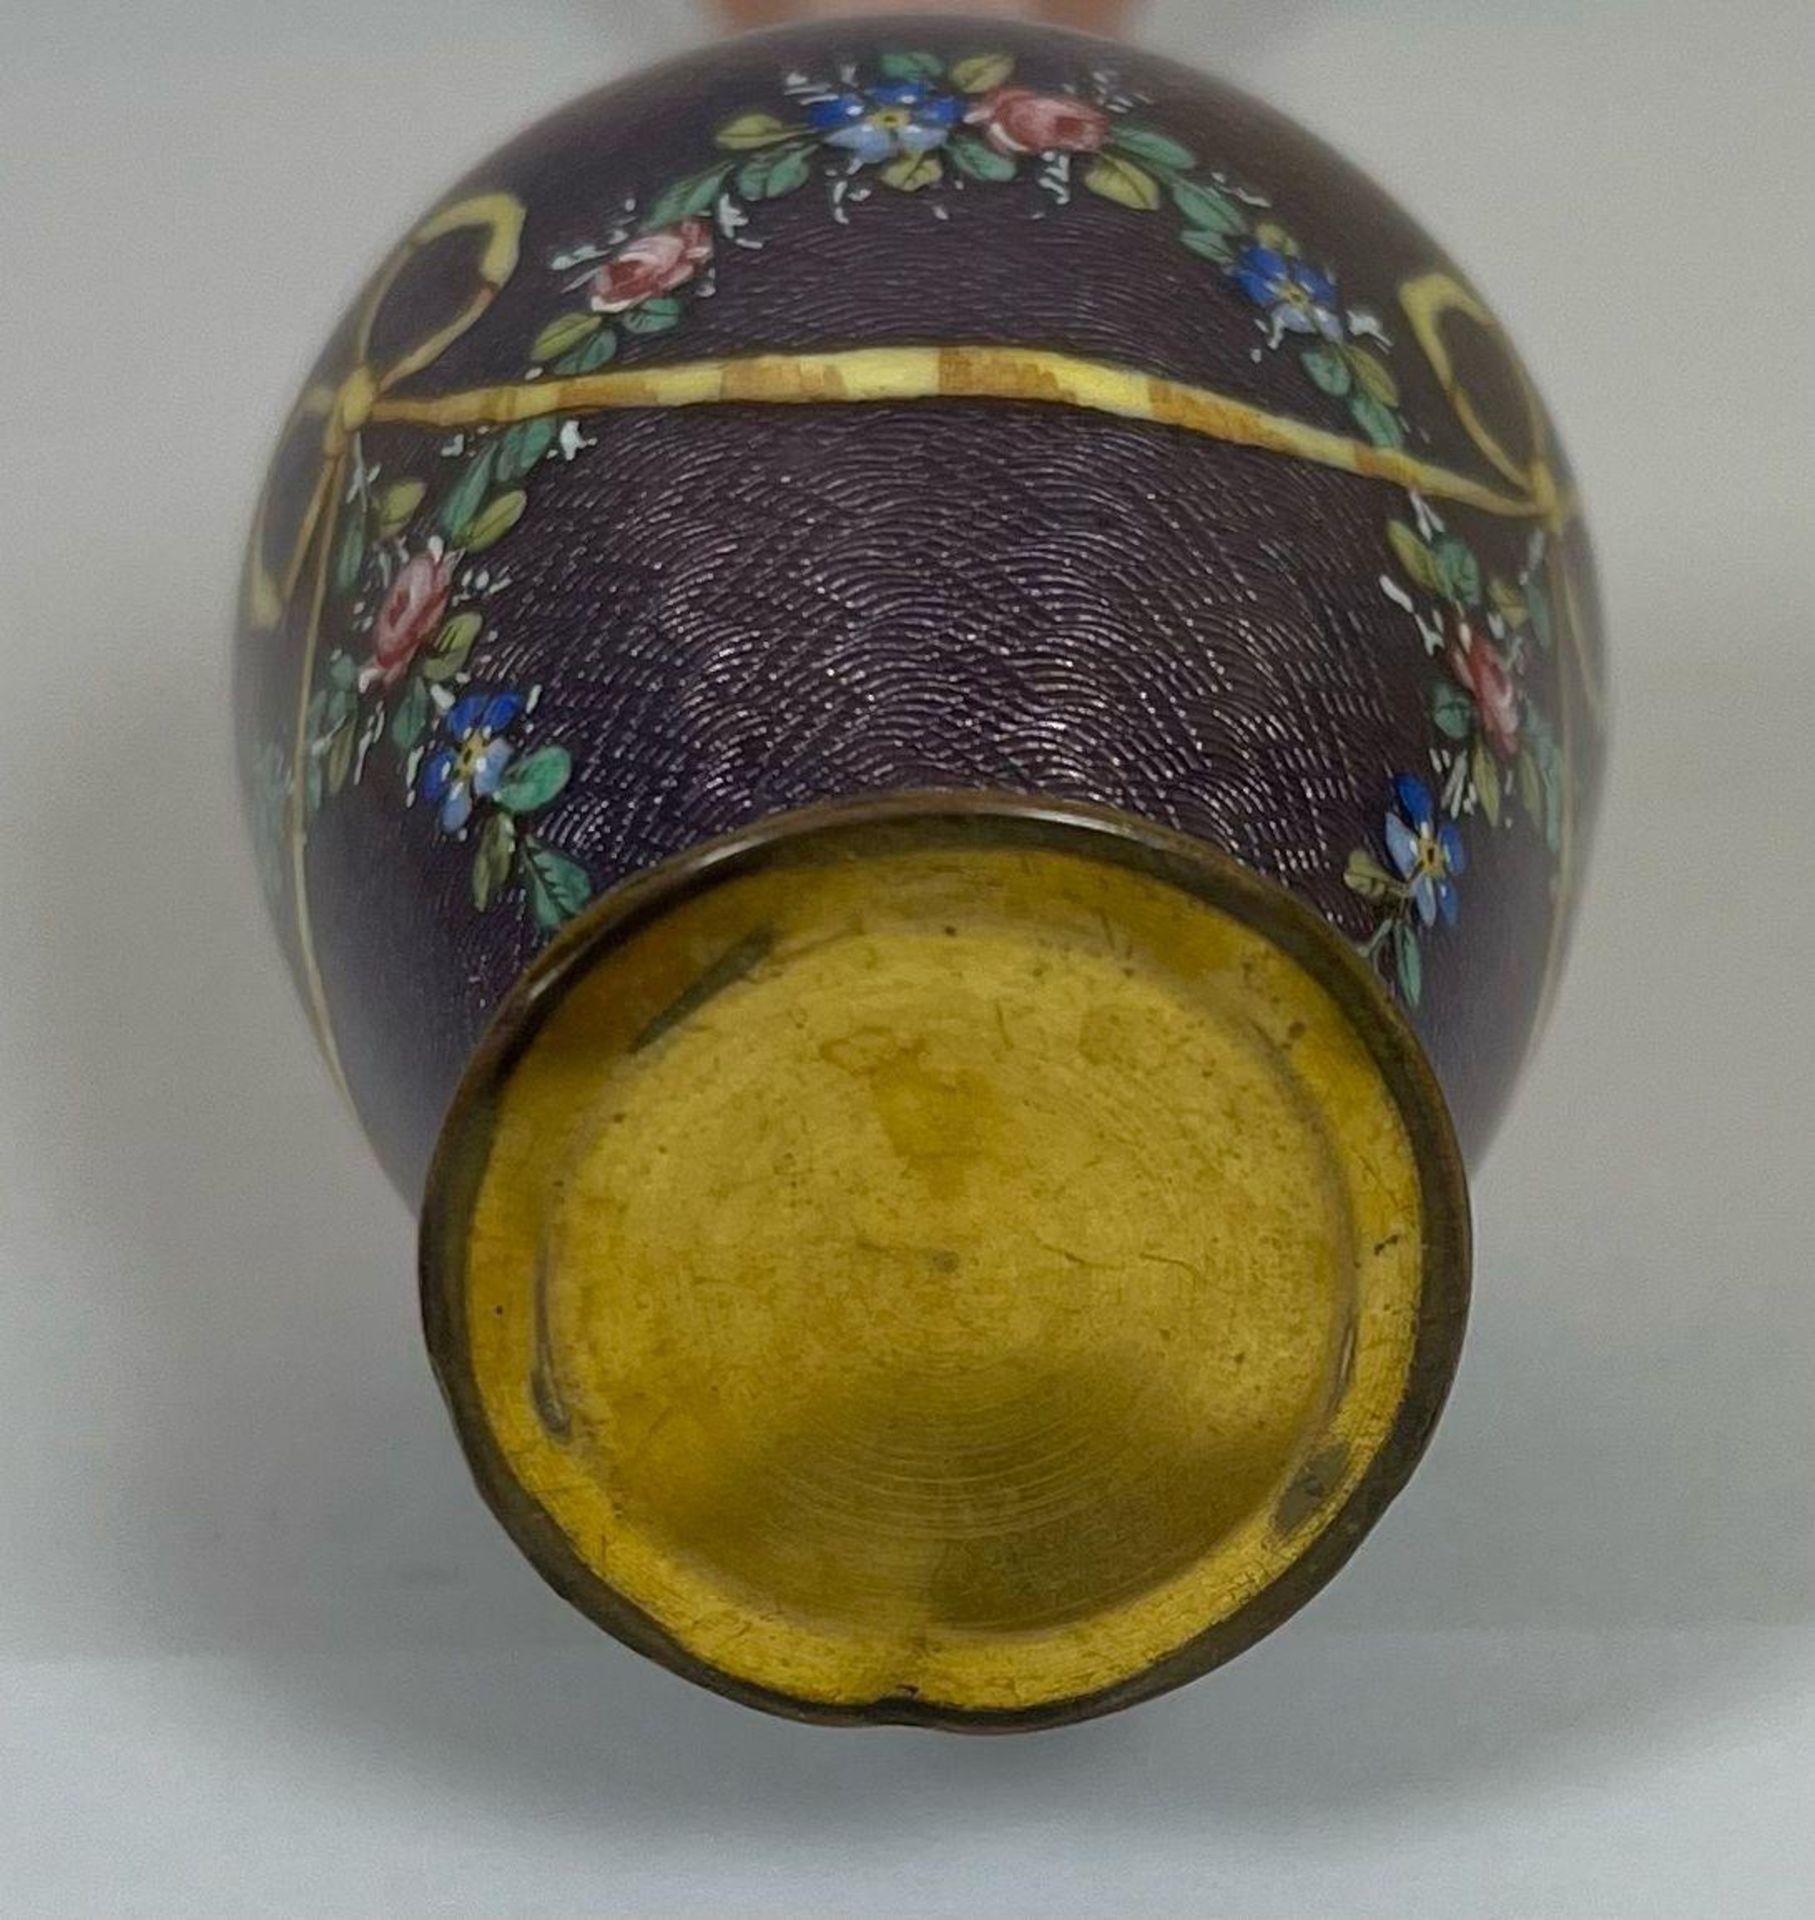 A EUROPEAN PINK & PURPLE ENAMEL DESIGN VASE DECORATED WITH FLORAL SWAG DESIGN, HEIGHT 15.5CM - Image 5 of 5